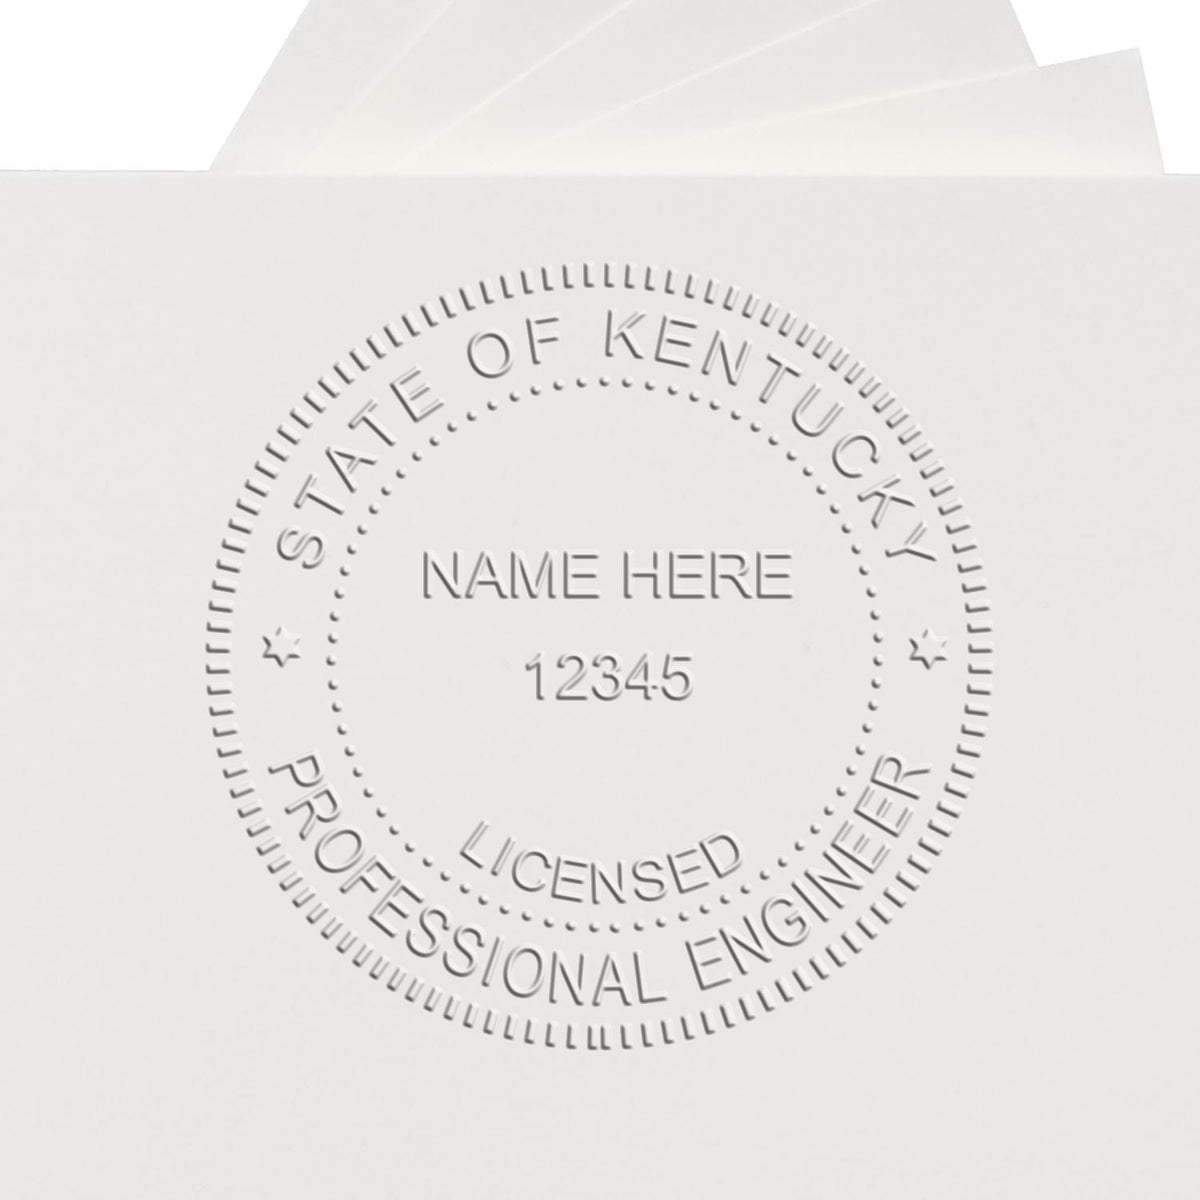 A stamped impression of the Soft Kentucky Professional Engineer Seal in this stylish lifestyle photo, setting the tone for a unique and personalized product.